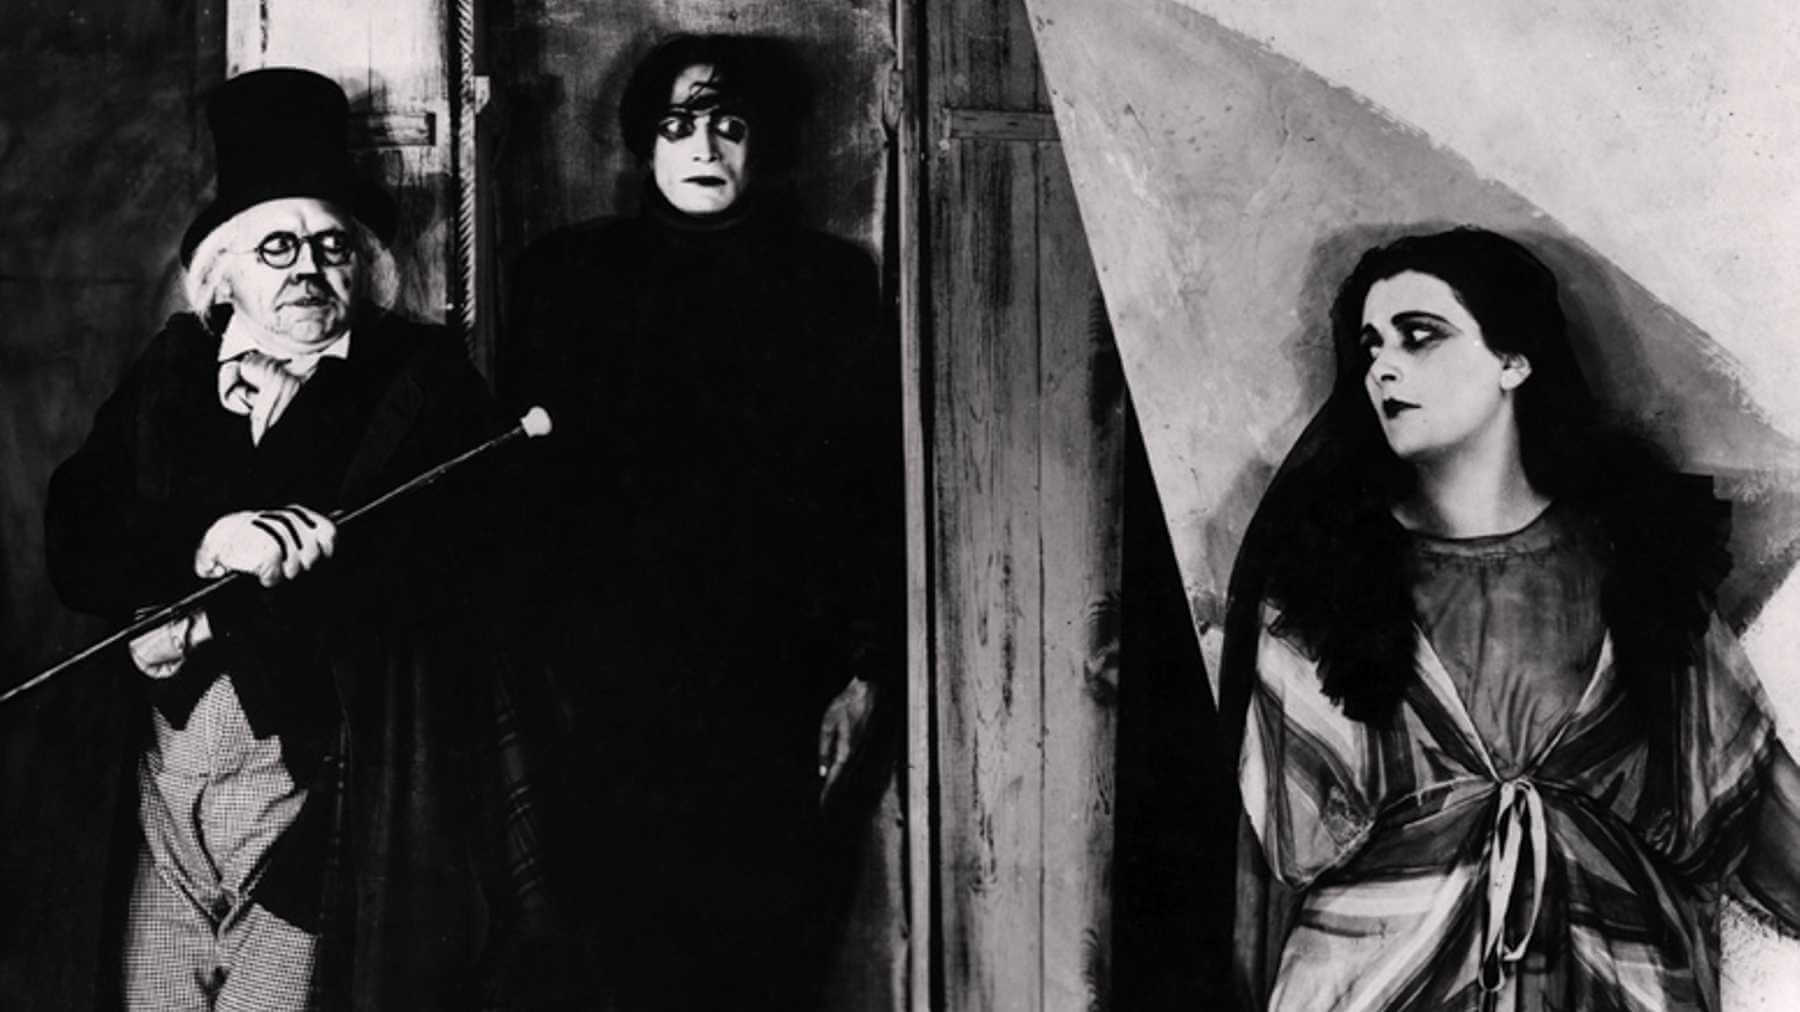 German Expressionist Horror - Featured Image - Films - RetroWitch Film Blog